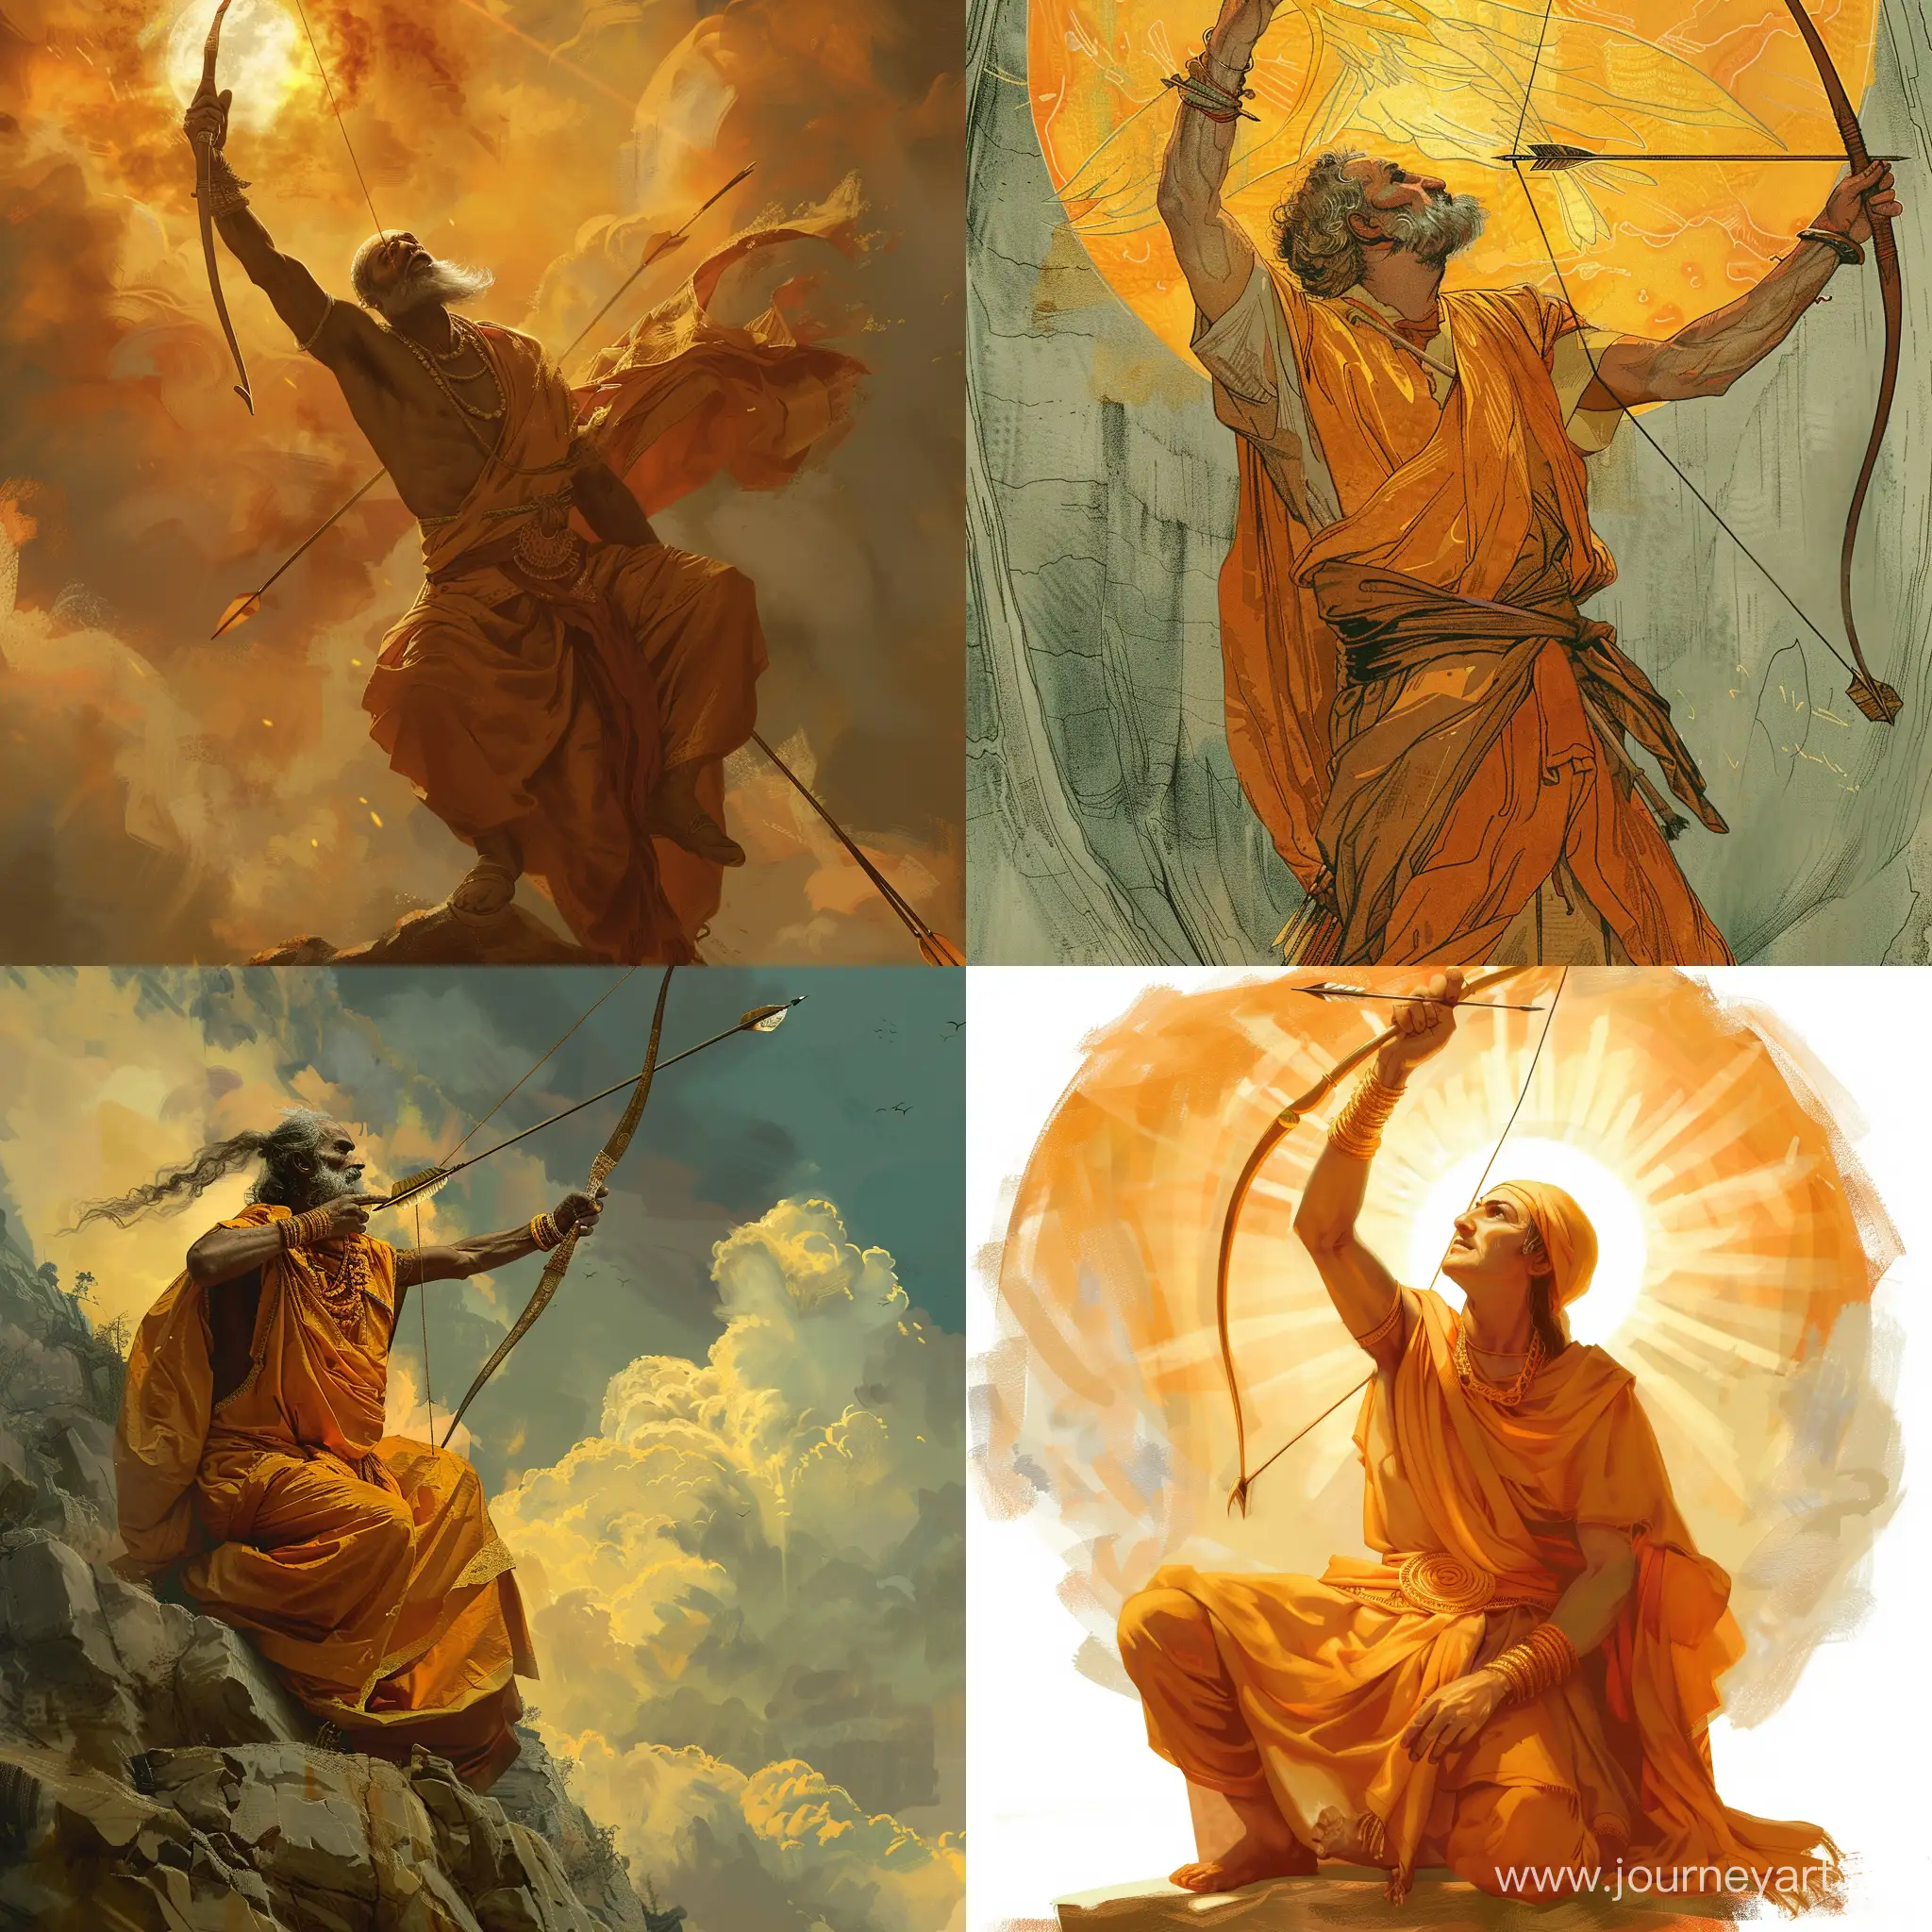 A saint got up and took an arrow and raised it towards the sky, that too wearing amber clothes